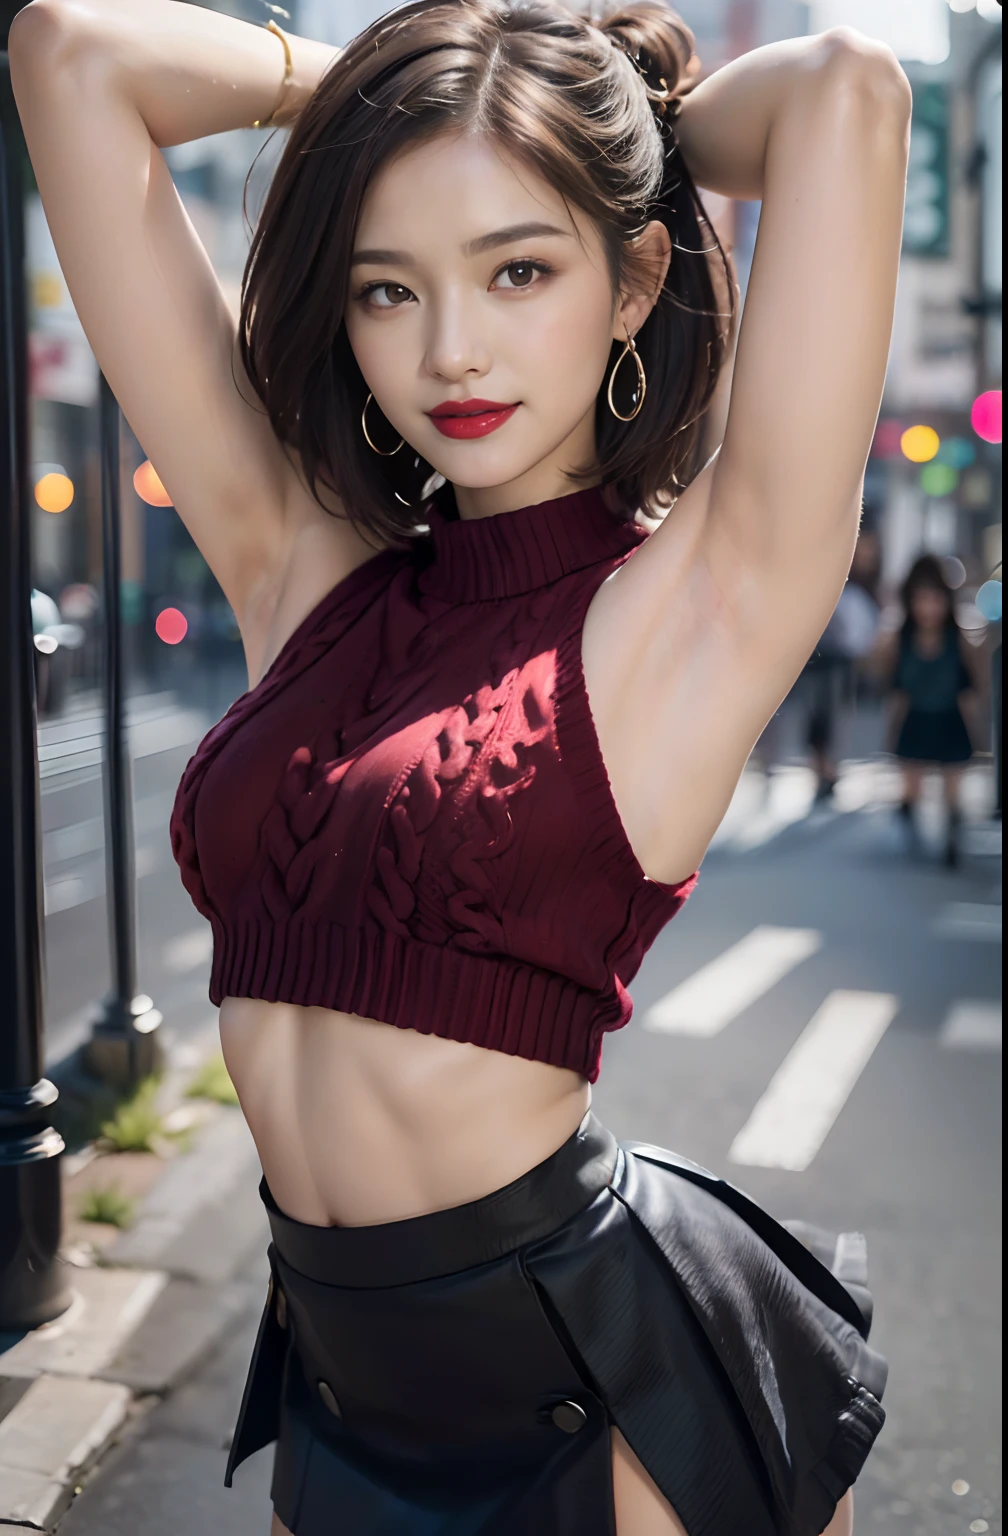 ((Show underarms、Ultra-realistic armpits、、Armpit、Detailed armpit wrinkles、Detailed armpit pores、Realistic armpit skin、Black armpit skin、Black armpits、armpit pose、gazing at viewer、smil、Full body armpits standing facing the viewer、Show both armpiticromini skirt、Very short skirt、Super mini skirt with waist length slit、Super mini skirt with waist length slit、Standing on the street、Stand in the middle of town、in a street)), (illustratio), (hight resolution), (8K), (ighly detailed), (The best illustrations), (armpit pose、beatiful detailed eyes), (top-quality), (Ultra-detail), (​masterpiece), (wall-paper), (Detailed face), (A smile、((40 years,red lipsticks,FEMALES,Show realistic armpits with sleeveless sweaters))、Brown hair,short-hair,((Woman in red sleeveless sweater and very short skirt、Show the navel)), japanes,(Slim body、Small)